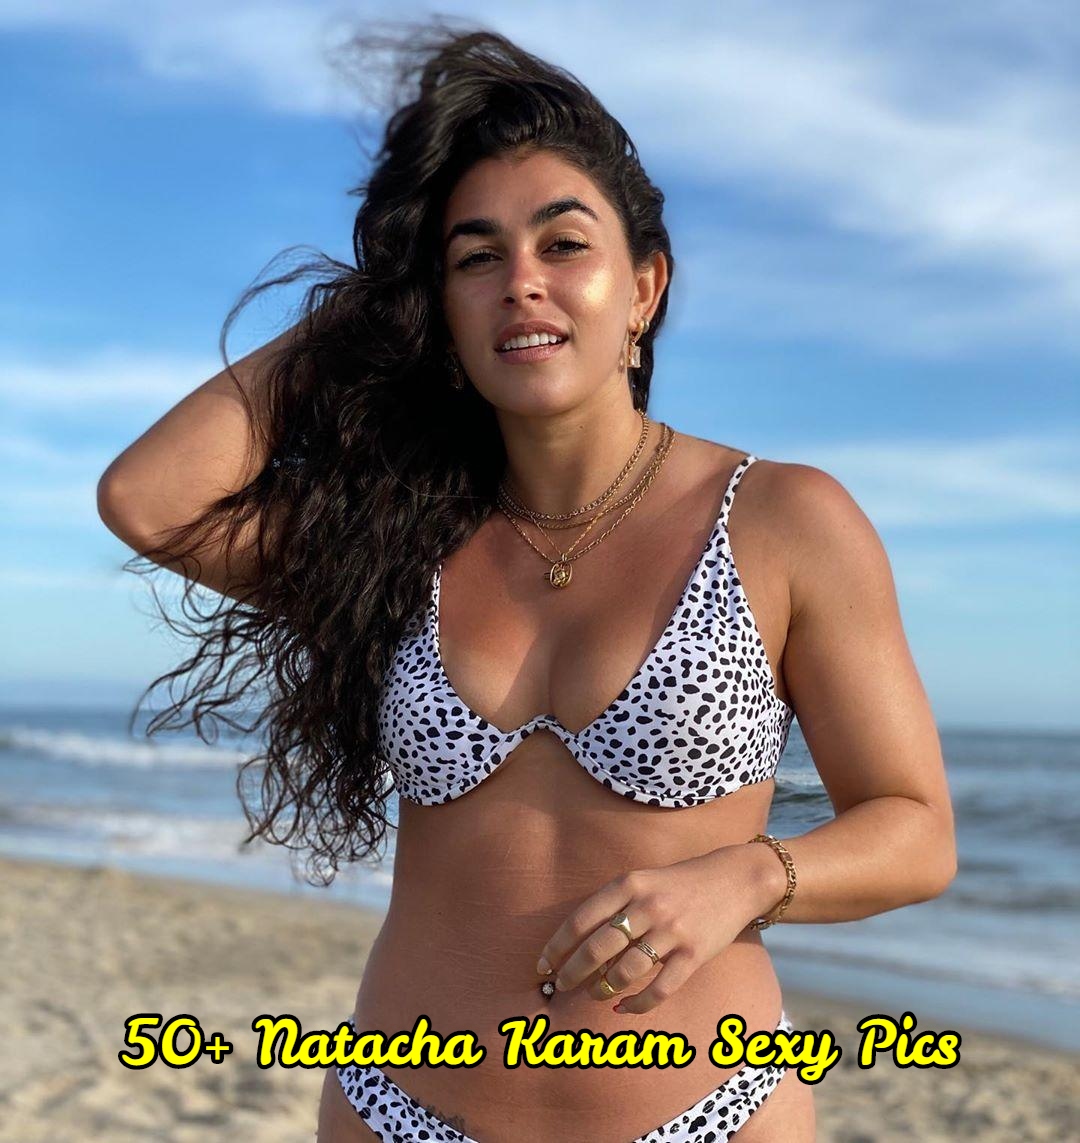 Hot Pictures Of Natacha Karam That Will Make Your Heart Pound For Her